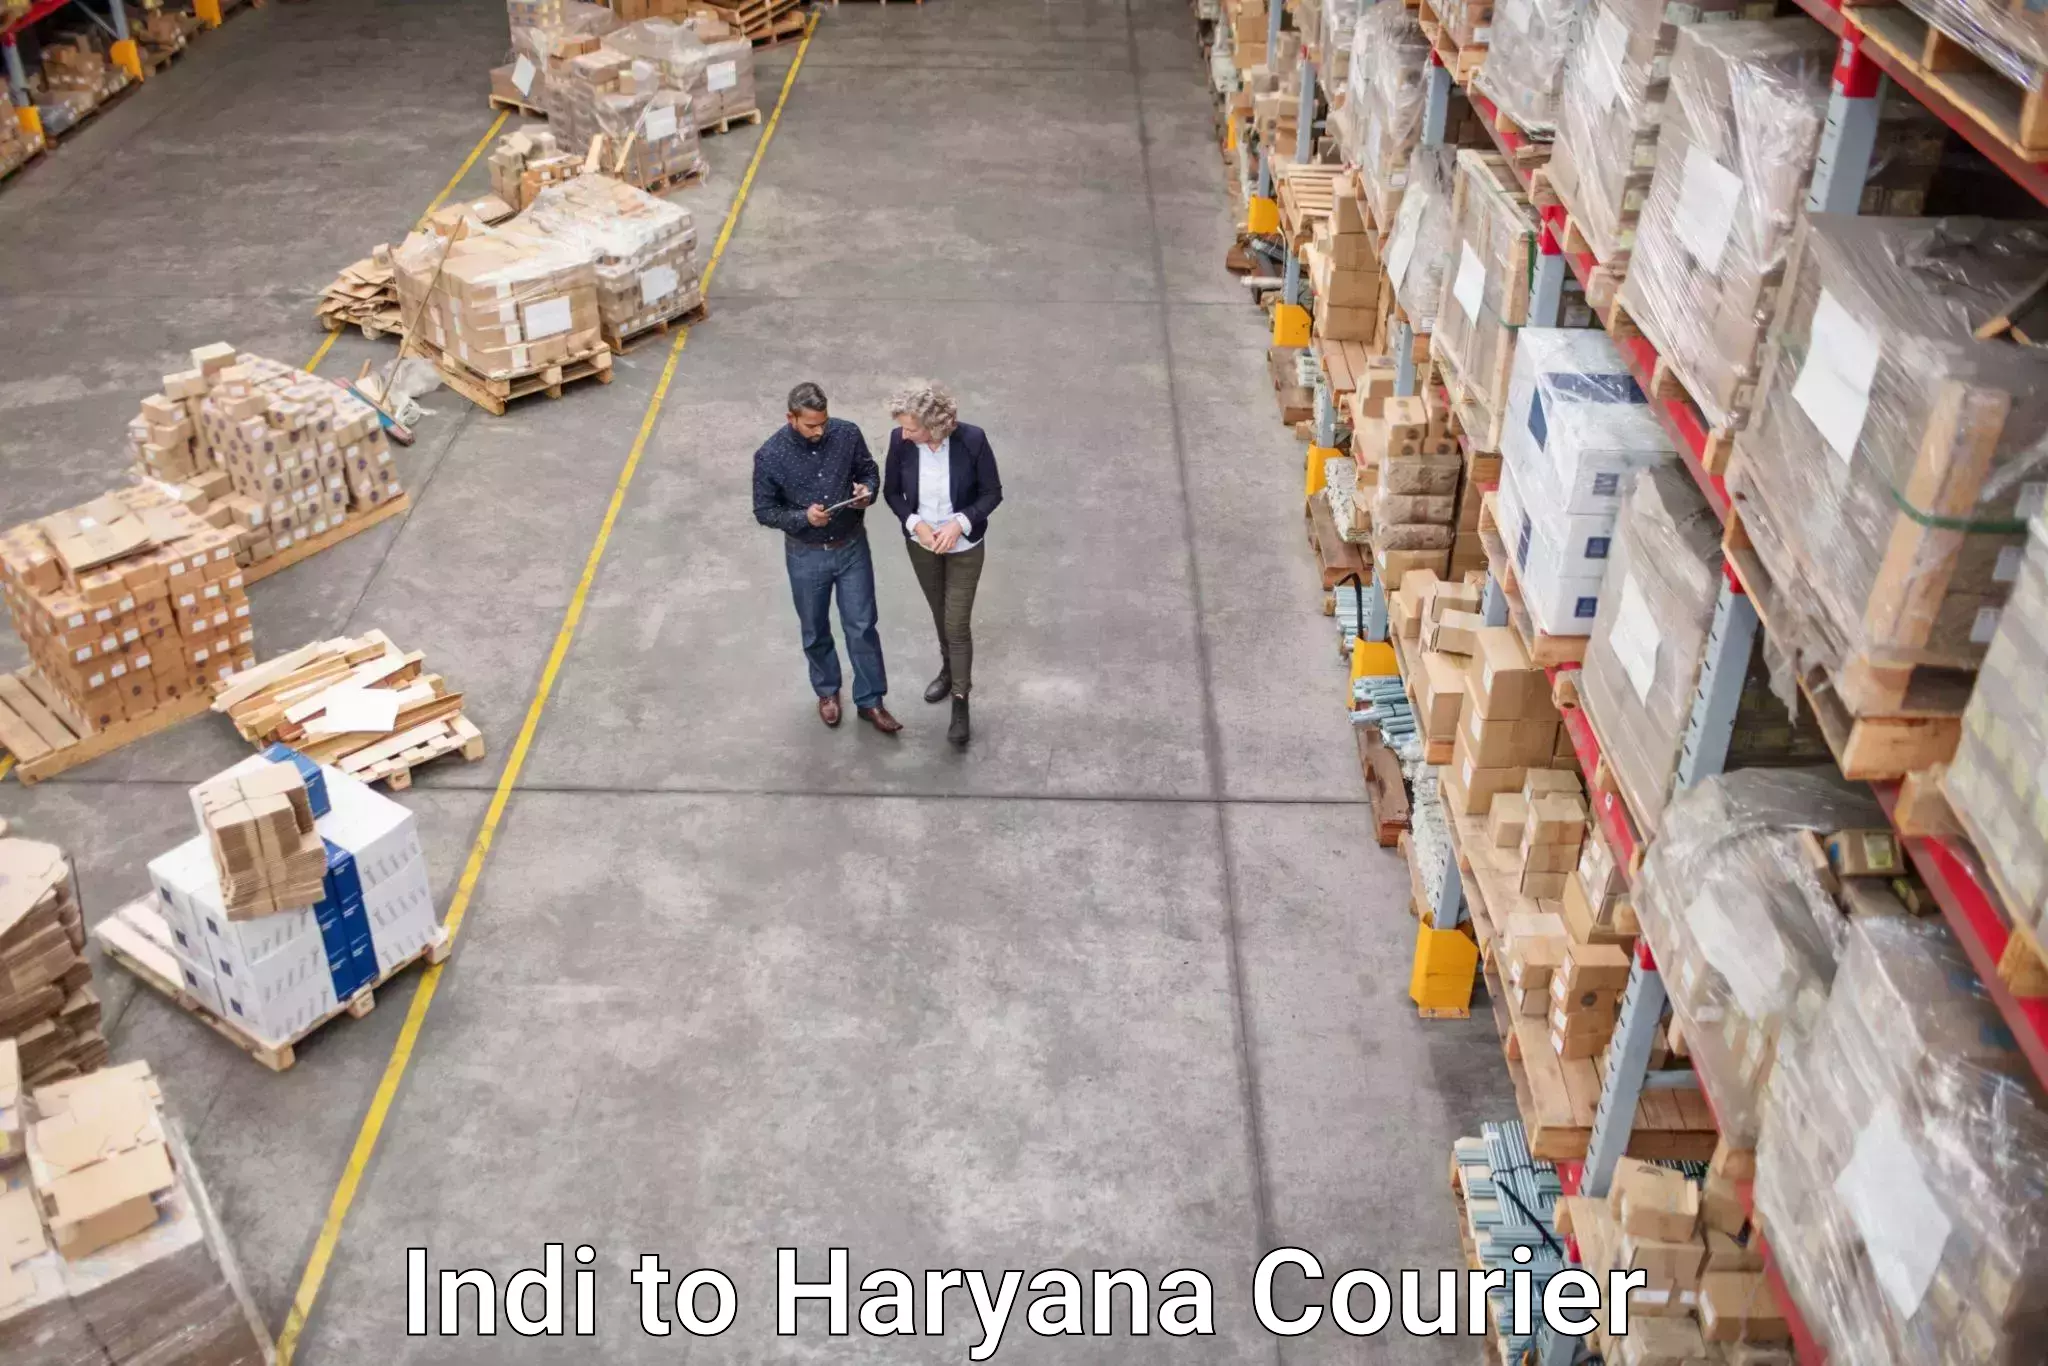 Efficient order fulfillment in Indi to Haryana